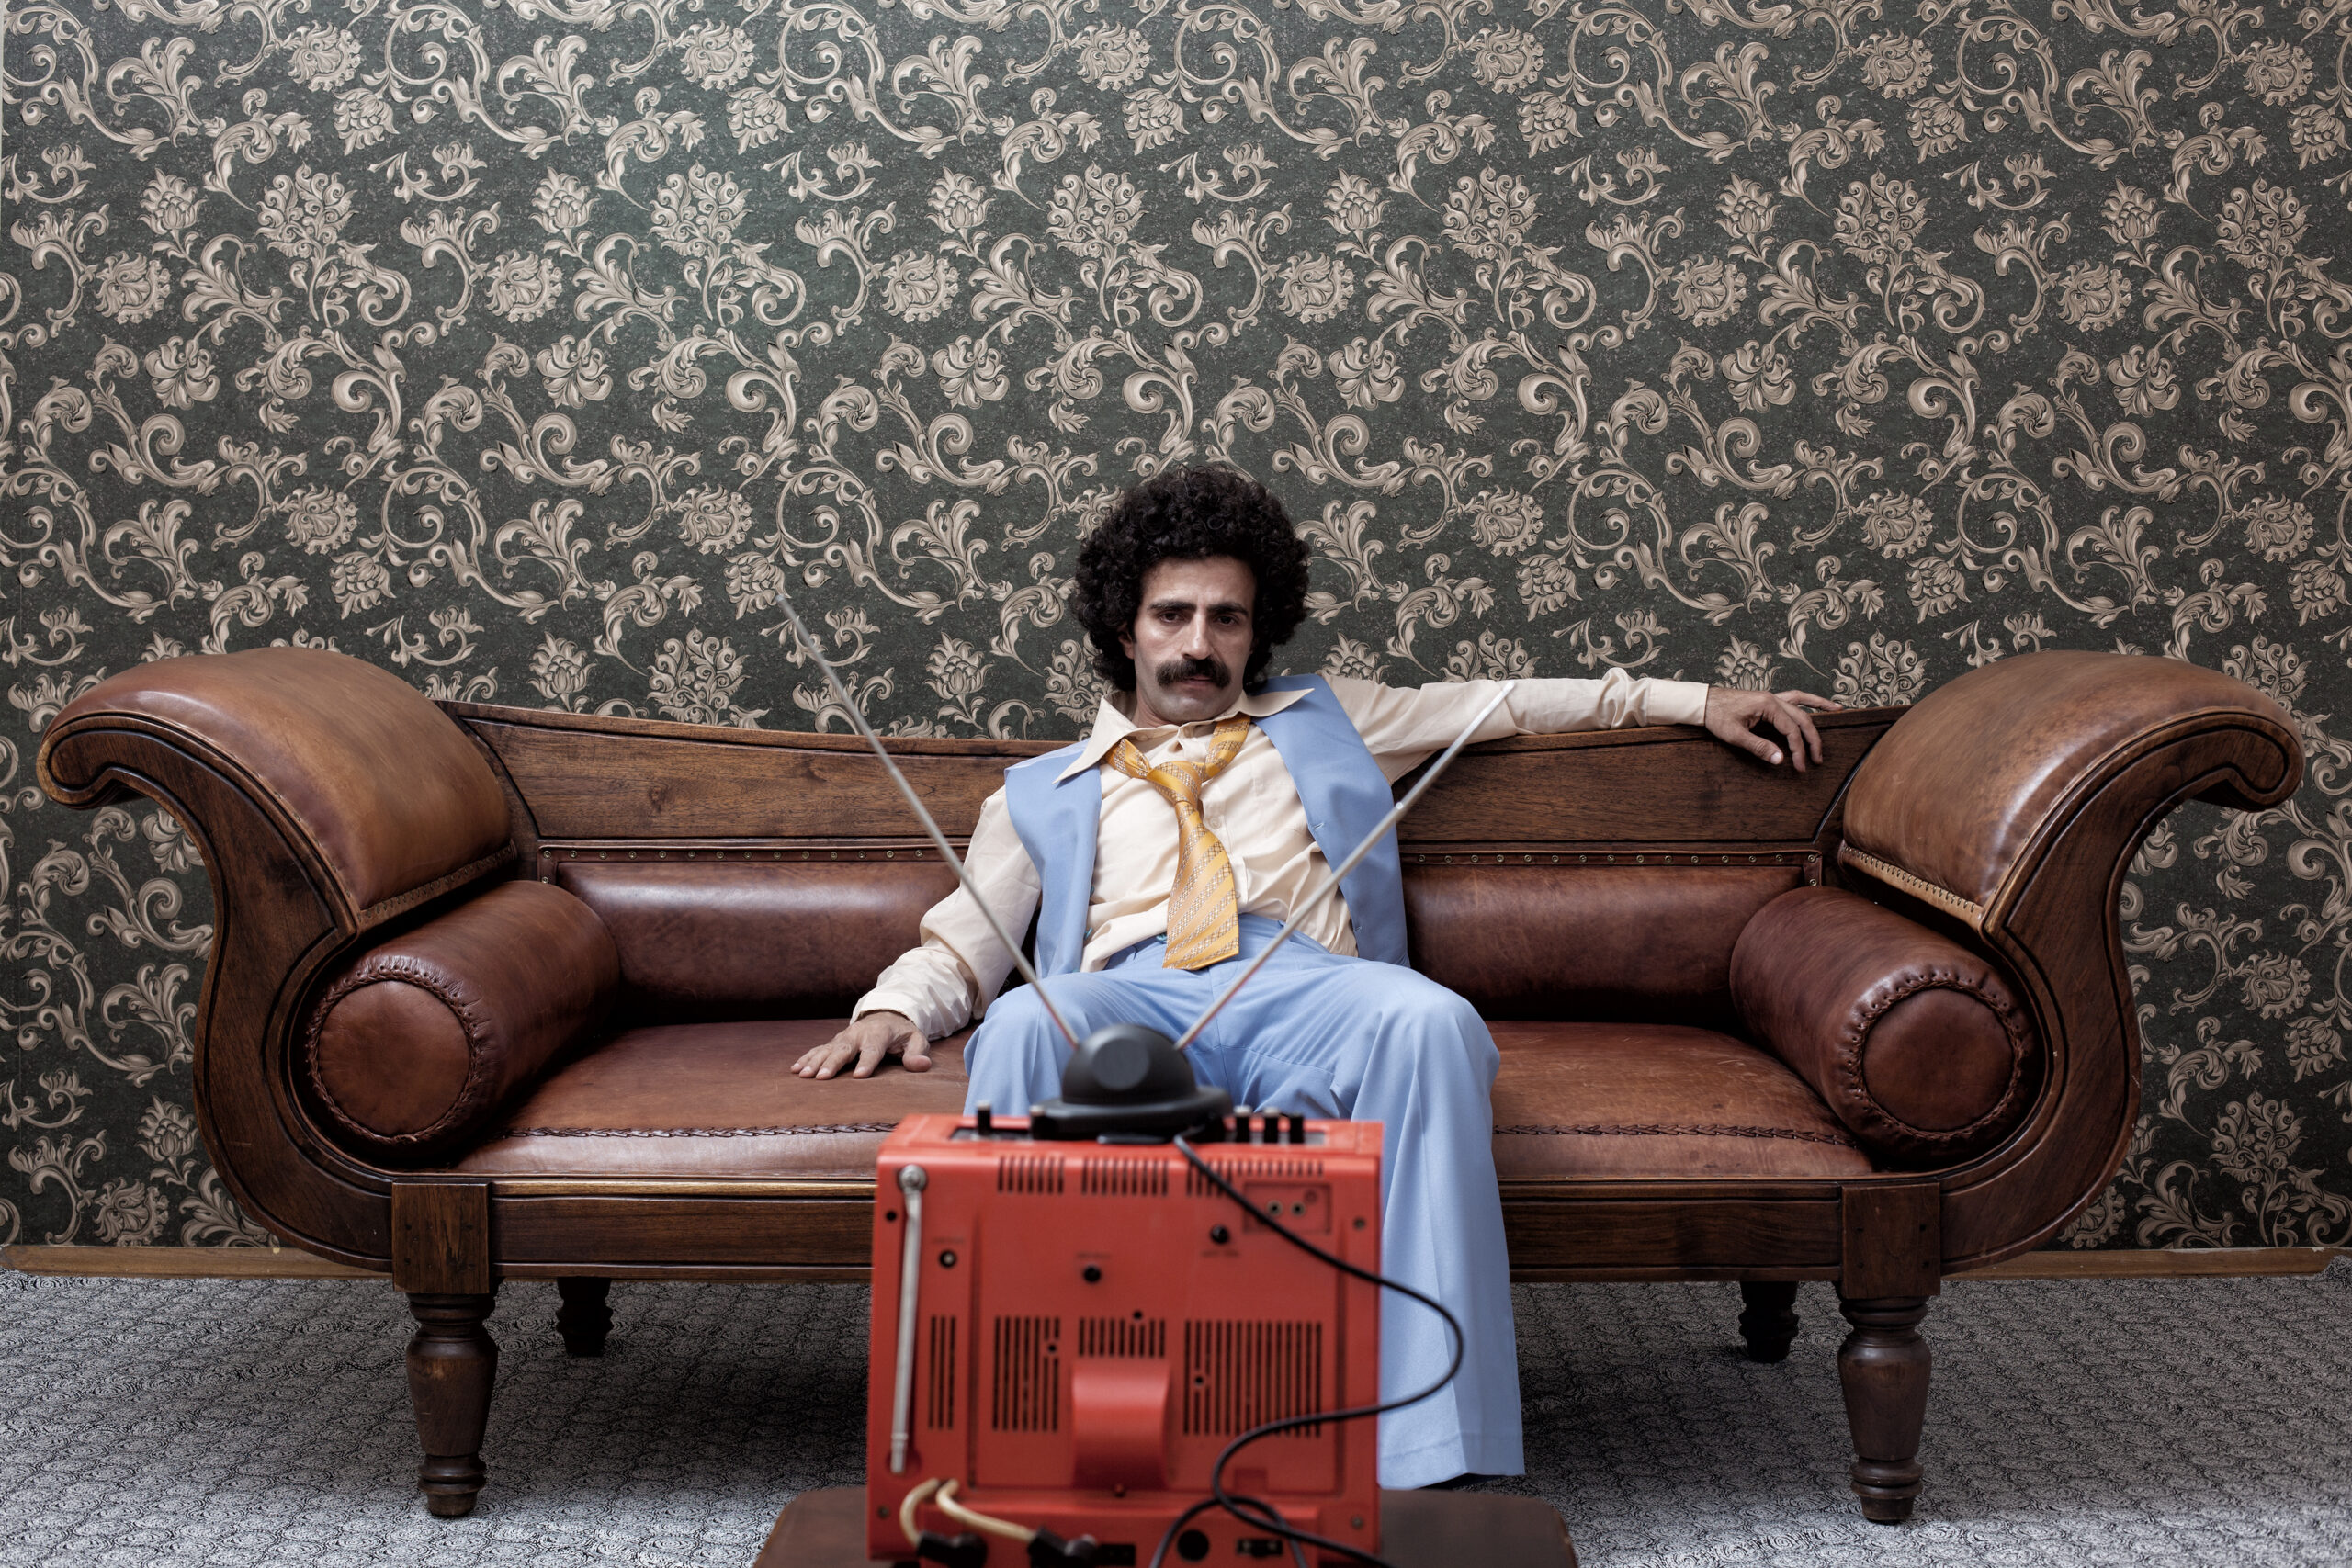 Man In 1970s Style Sitting On Sofa Watching Television